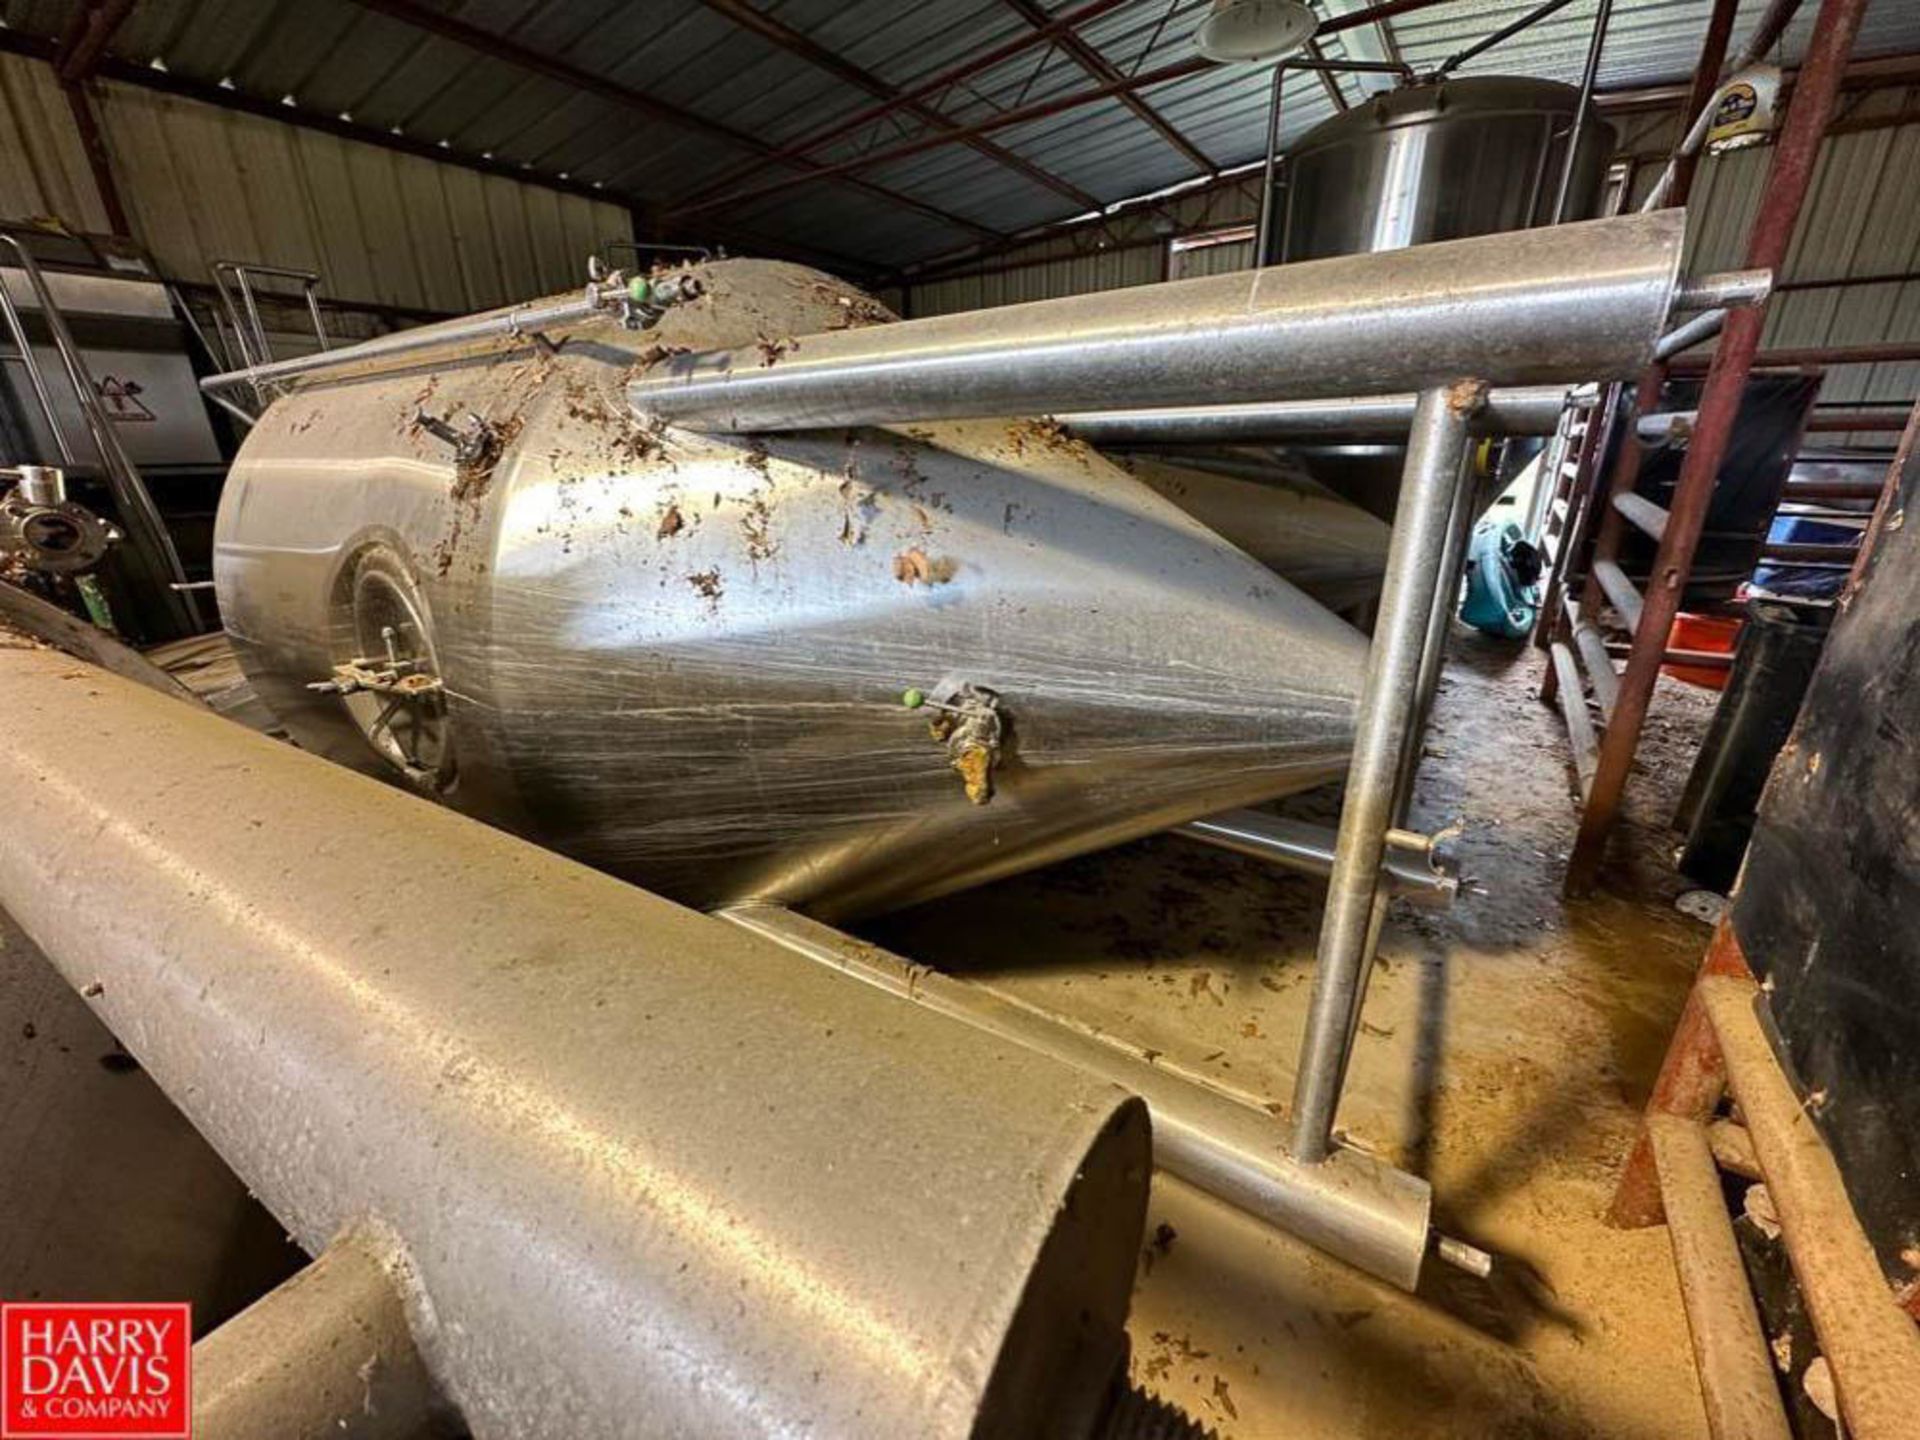 30 BBL S/S Fermenter (Location: Mabank, TX) - Rigging Fee: $750 - Image 2 of 4